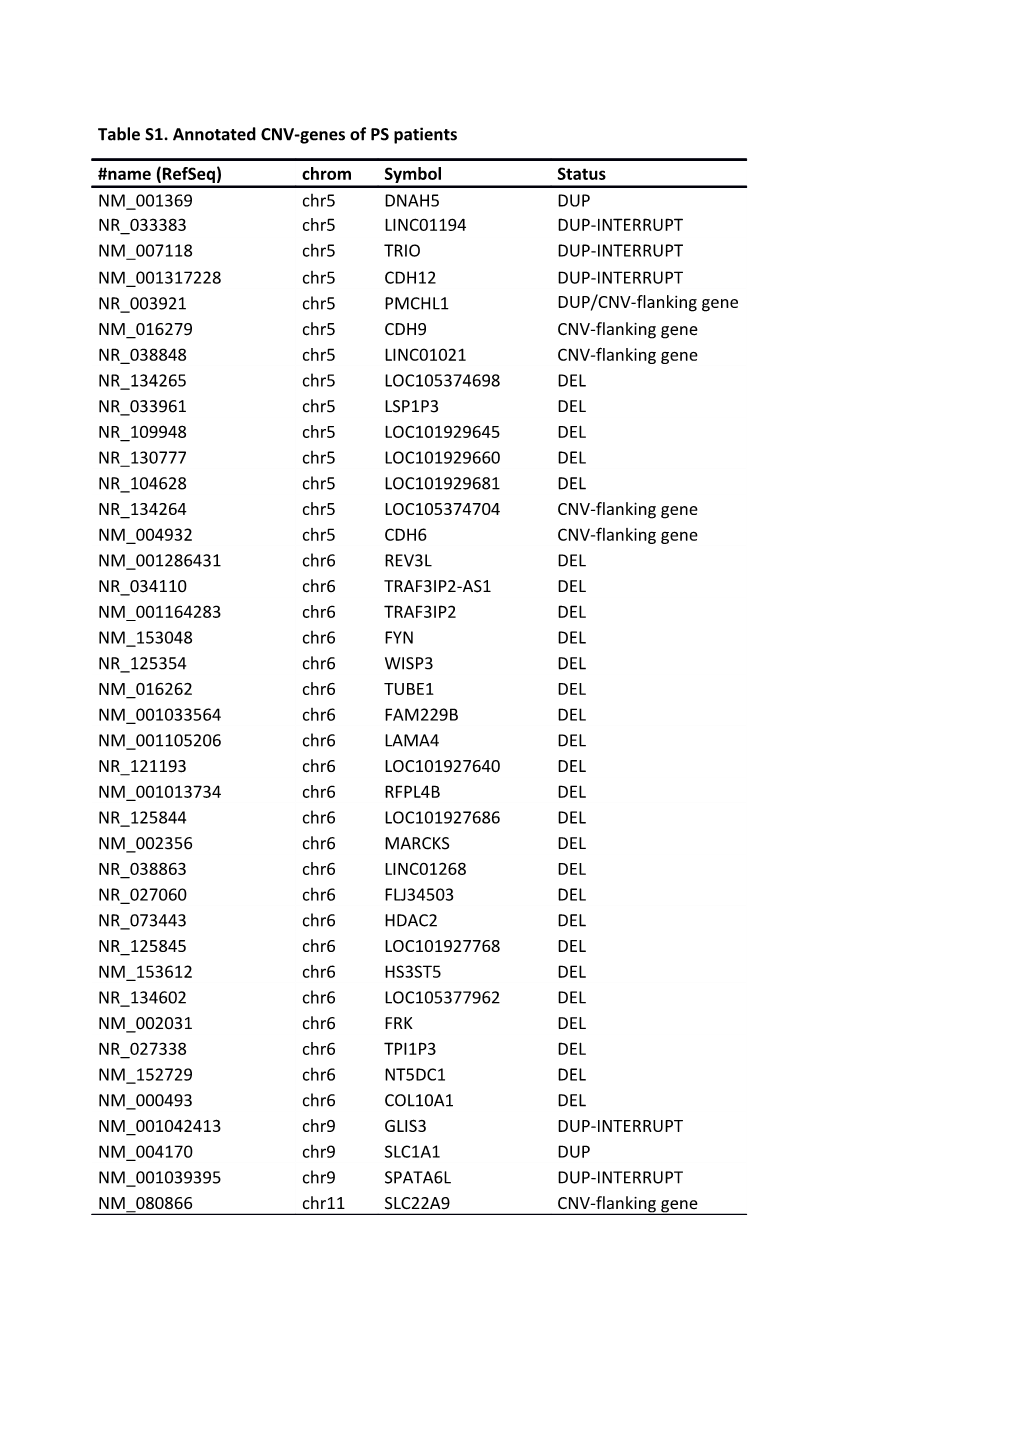 Table S1. Annotated CNV-Genes of PS Patients